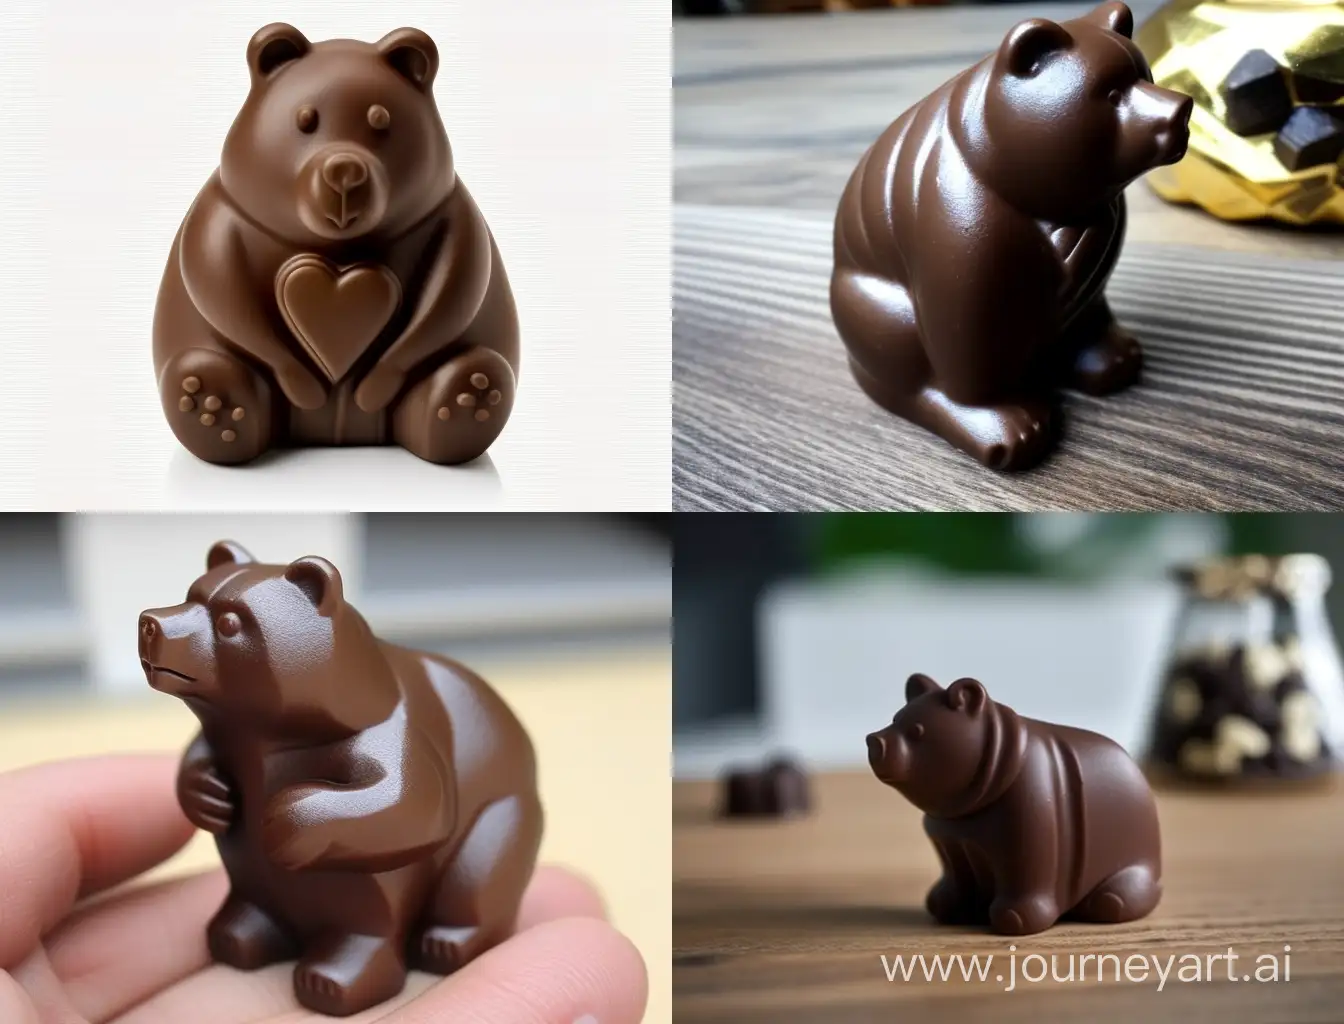 Chocolate in the shape of a bear with a 2d to make the most of the chocolate. Dimensions: height 5 cm, width 3 cm, diameter 3 cm.